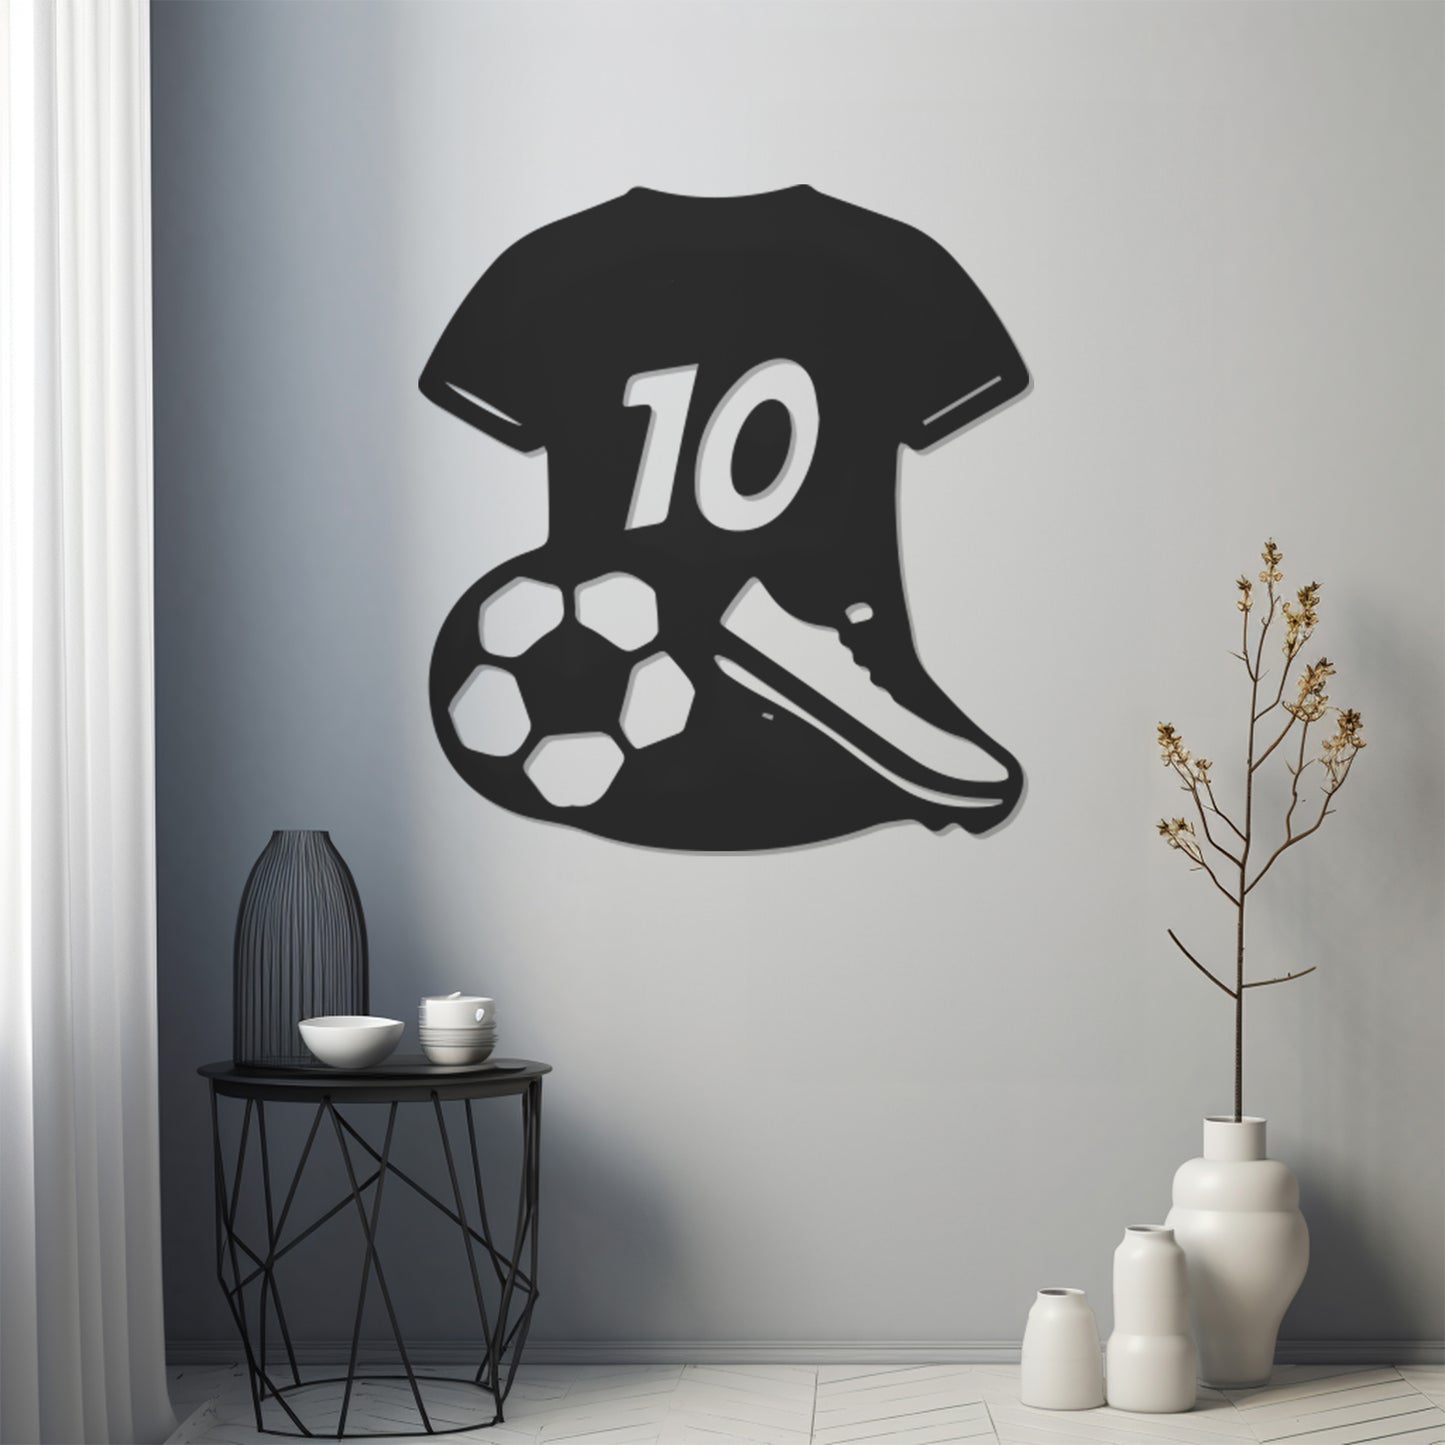 Metal Wall Decor With Messi's Number 10 Jersey, Football Boots And Football